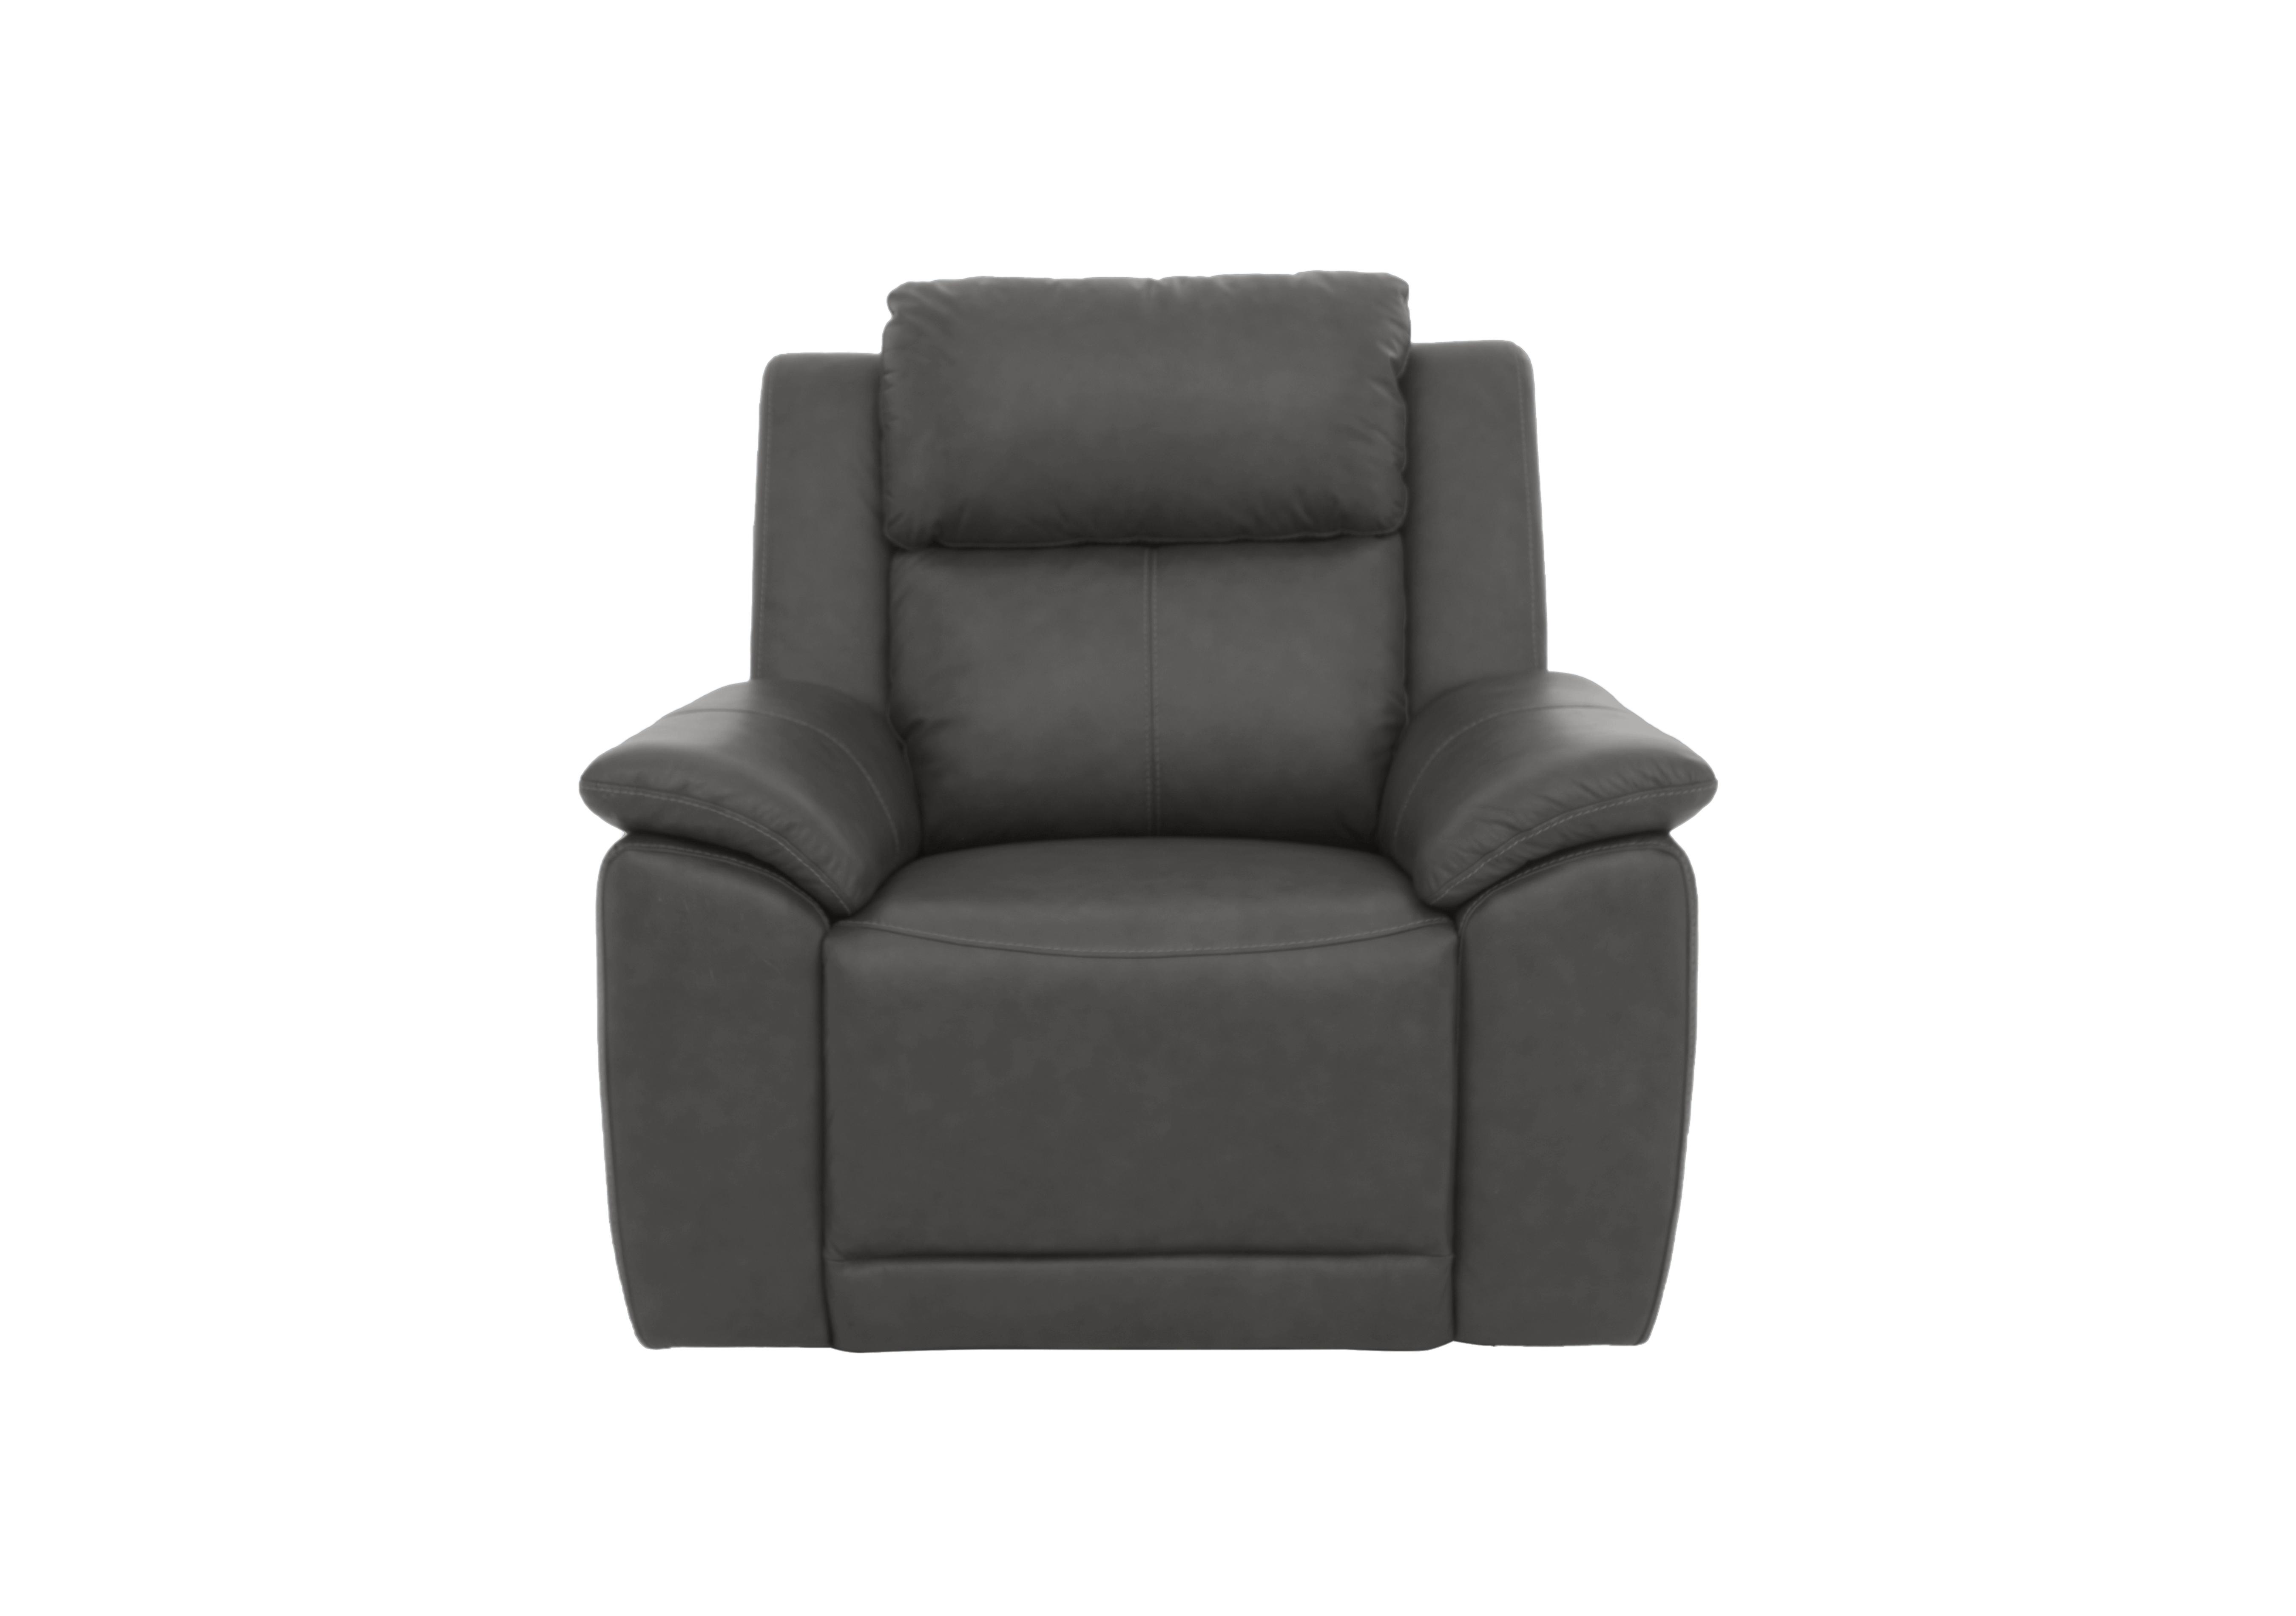 Utah Leather Power Recliner Chair with Power Headrest and Power Lumbar in Grey Le-9308 on Furniture Village